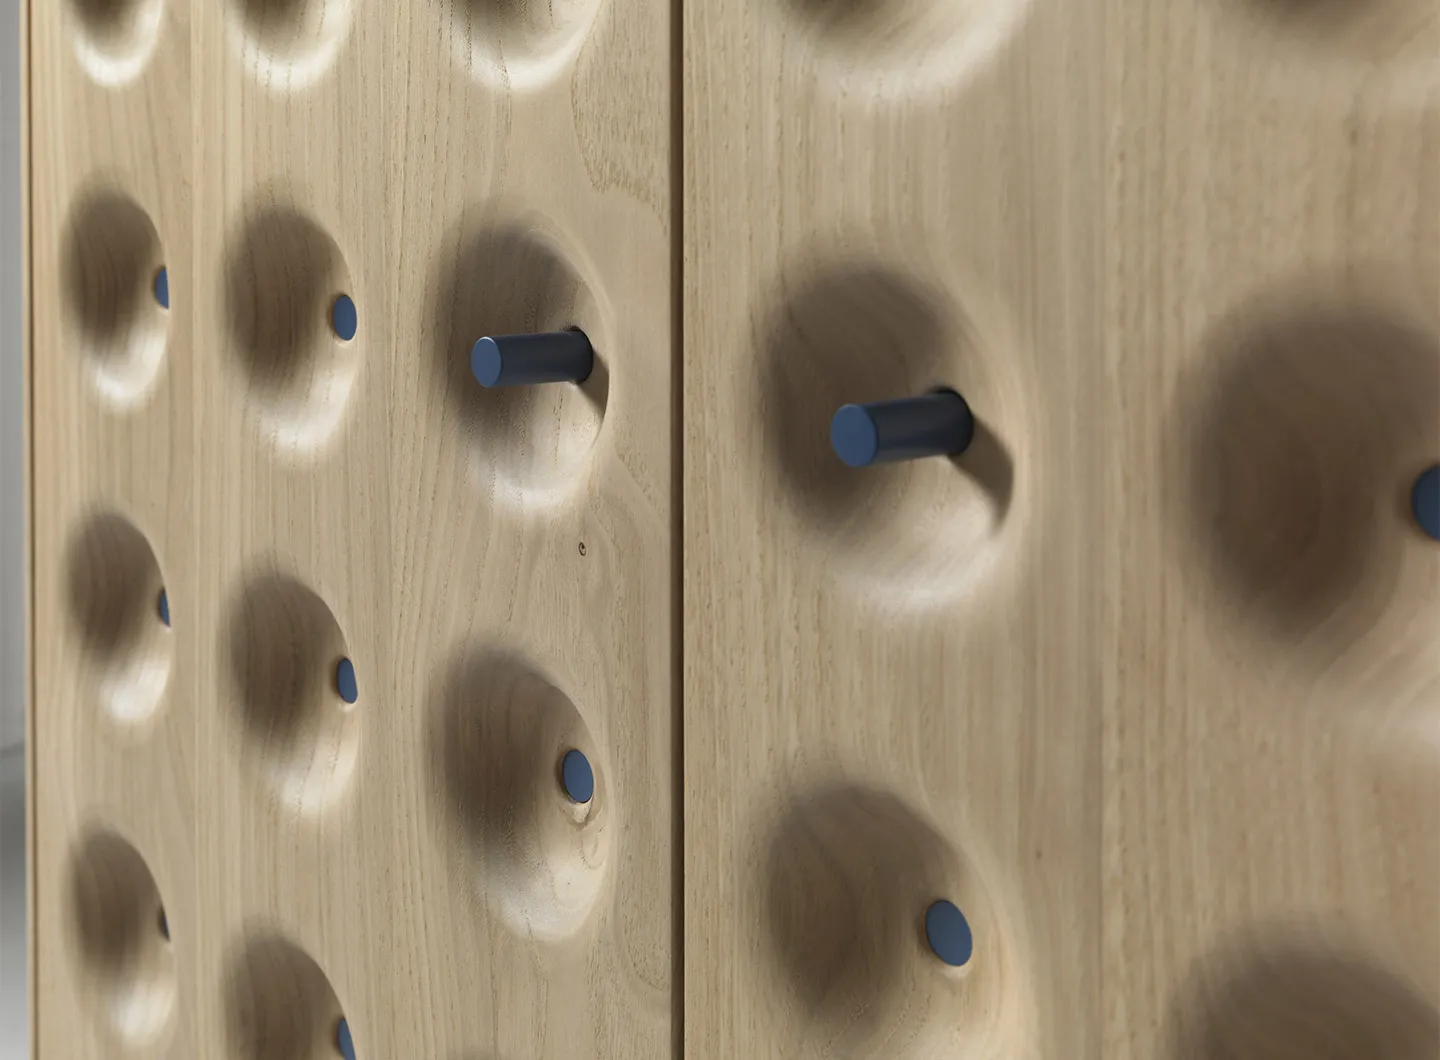 Durame - Breathe - A cabinet with an epidermal surface